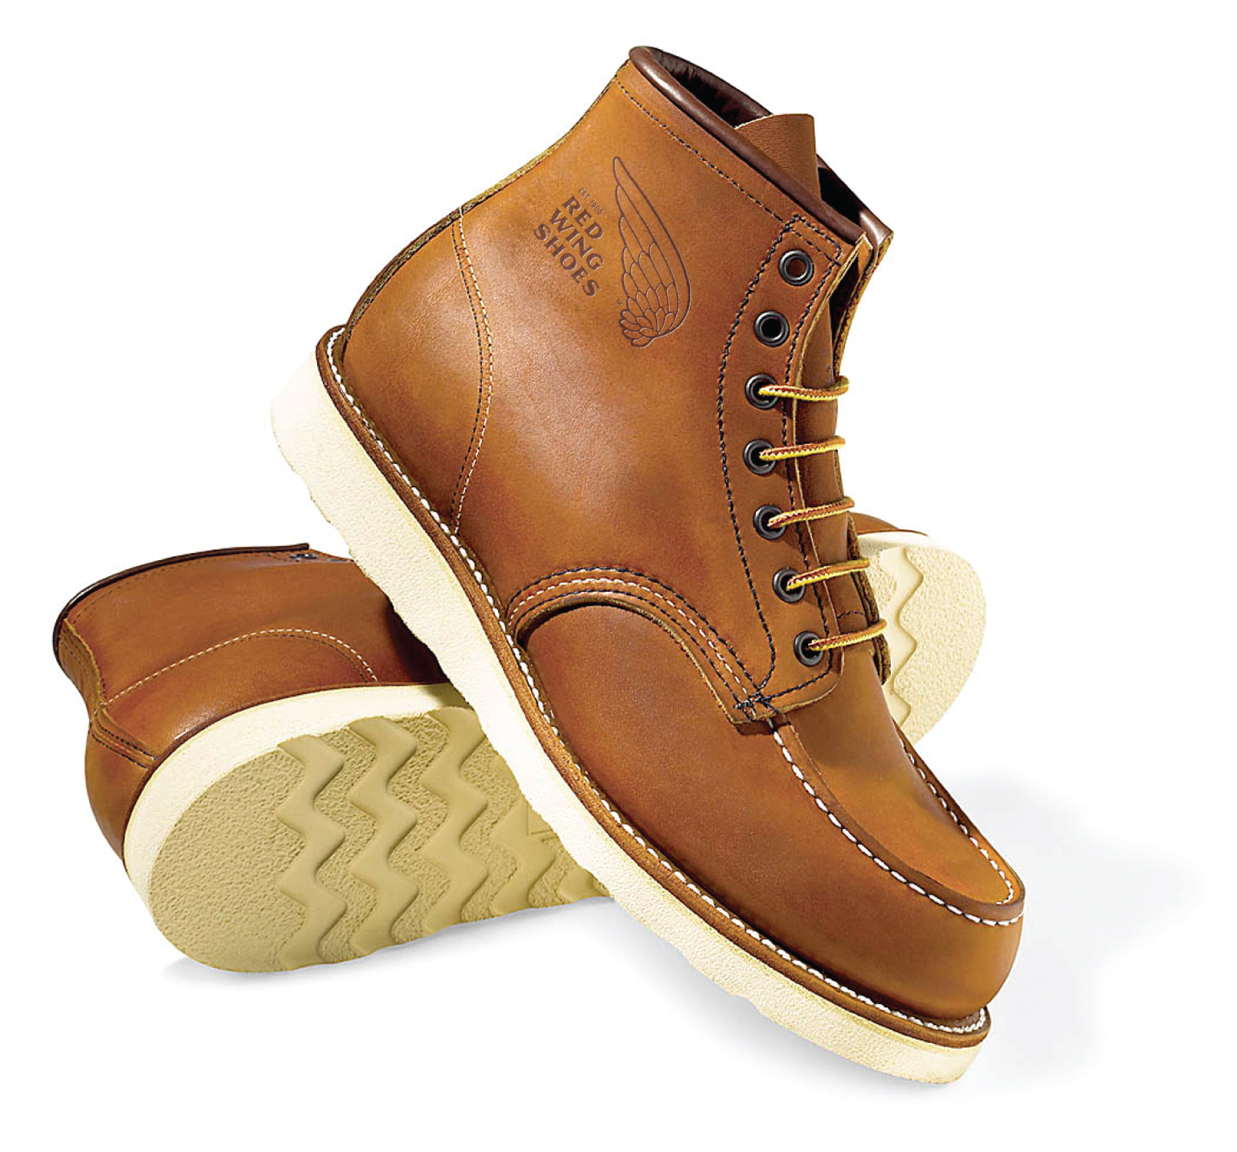 TRACTION TRED LITE — Red Wing Shoes of Lafayette